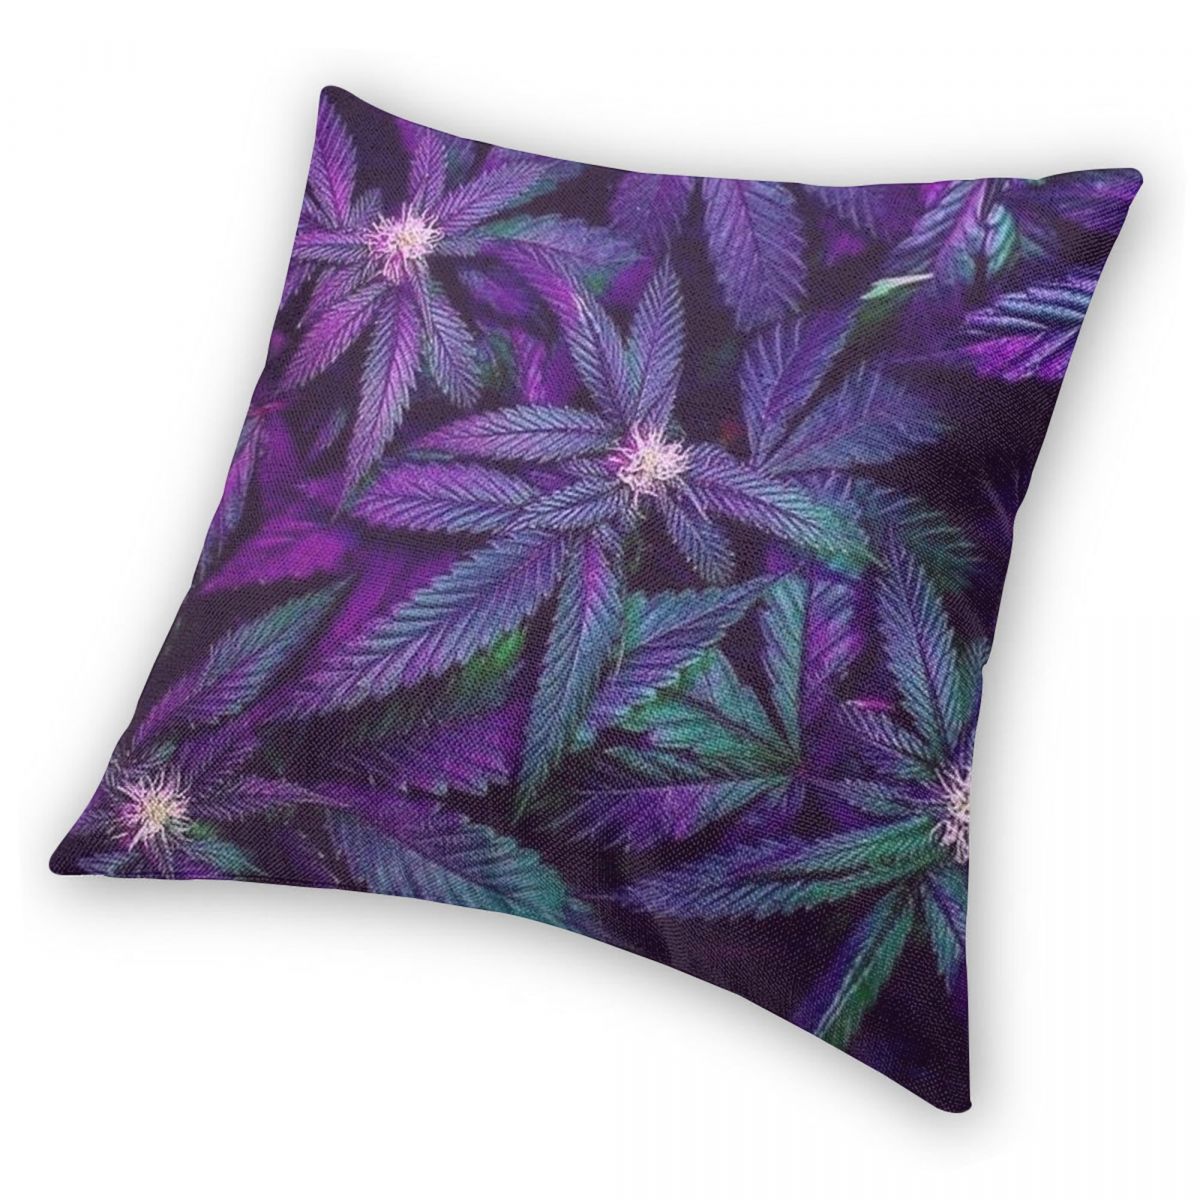 Psychedelic Cushion Cover